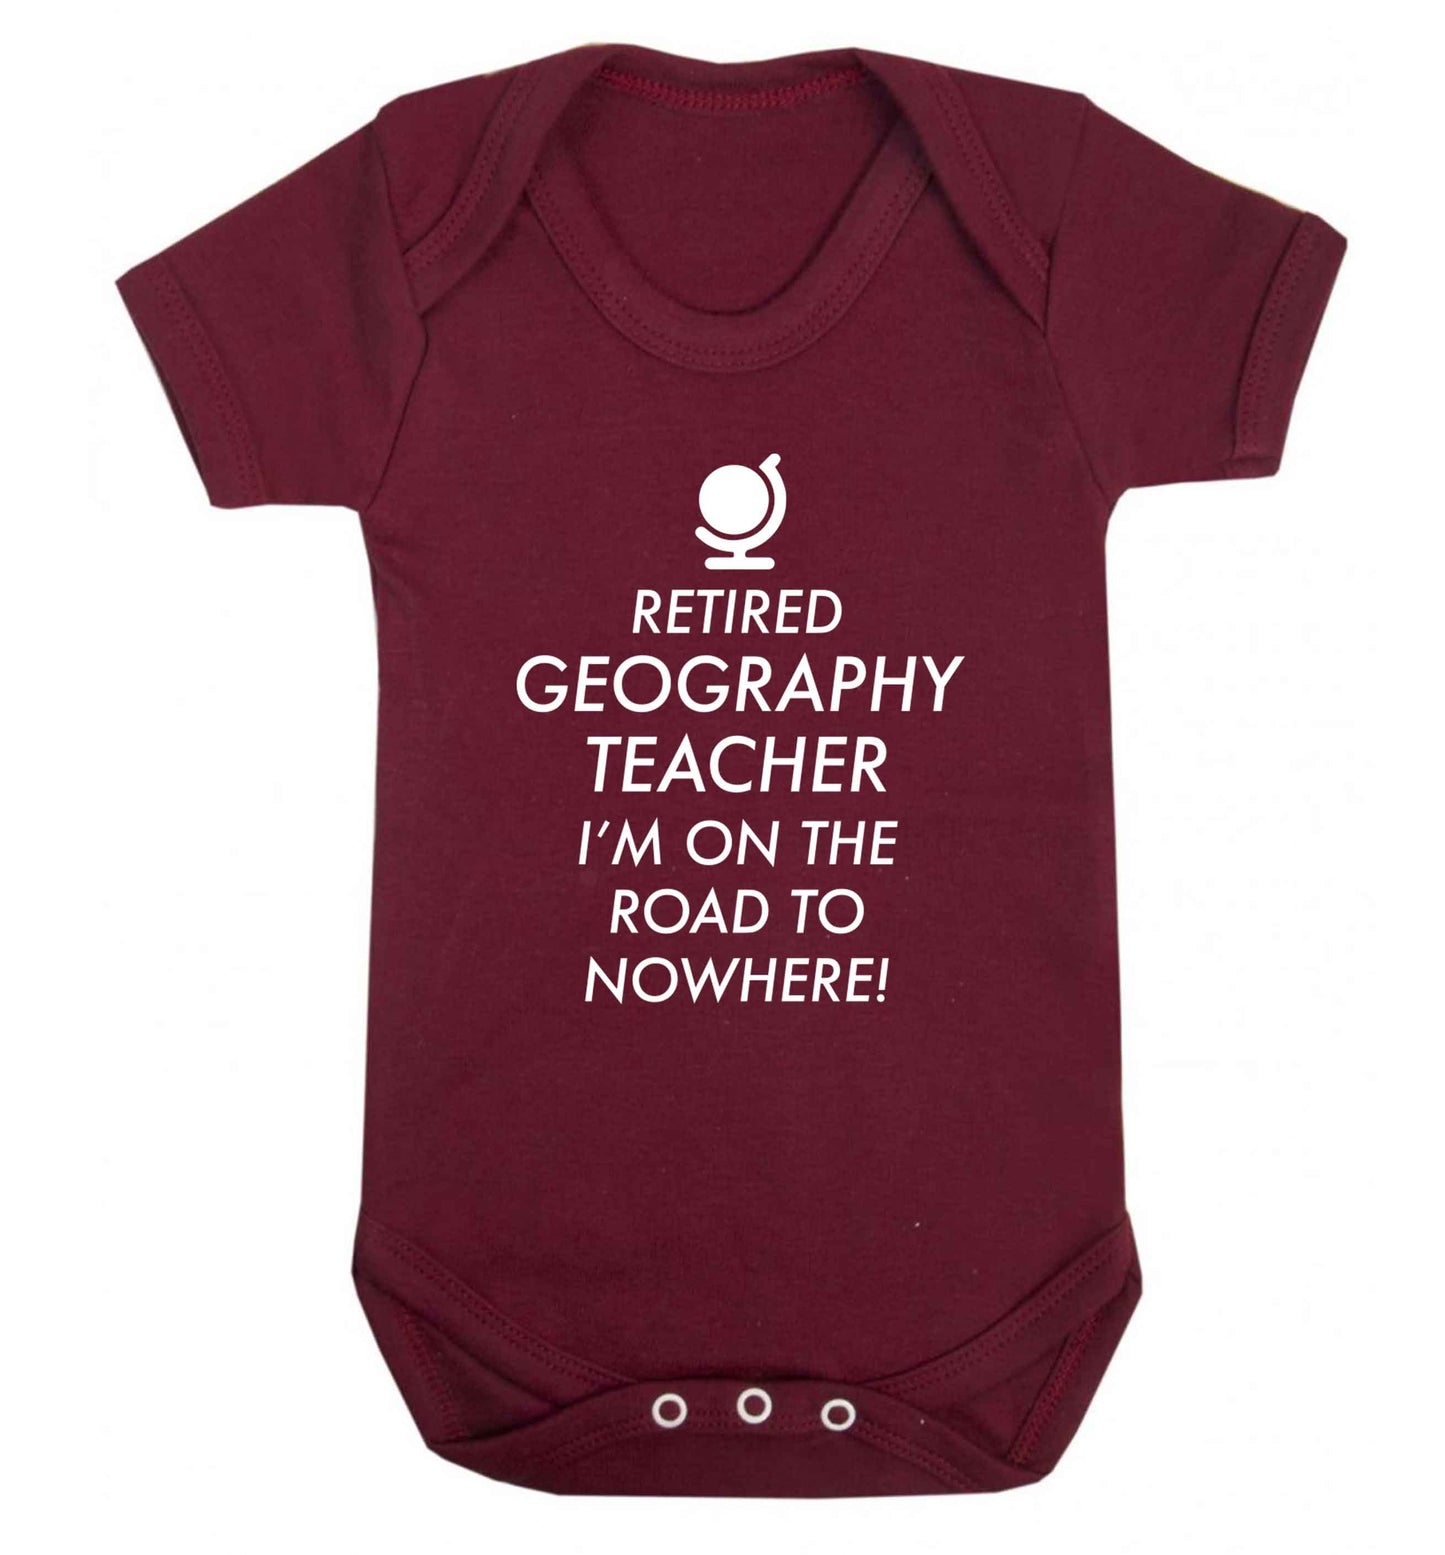 Retired geography teacher I'm on the road to nowhere Baby Vest maroon 18-24 months